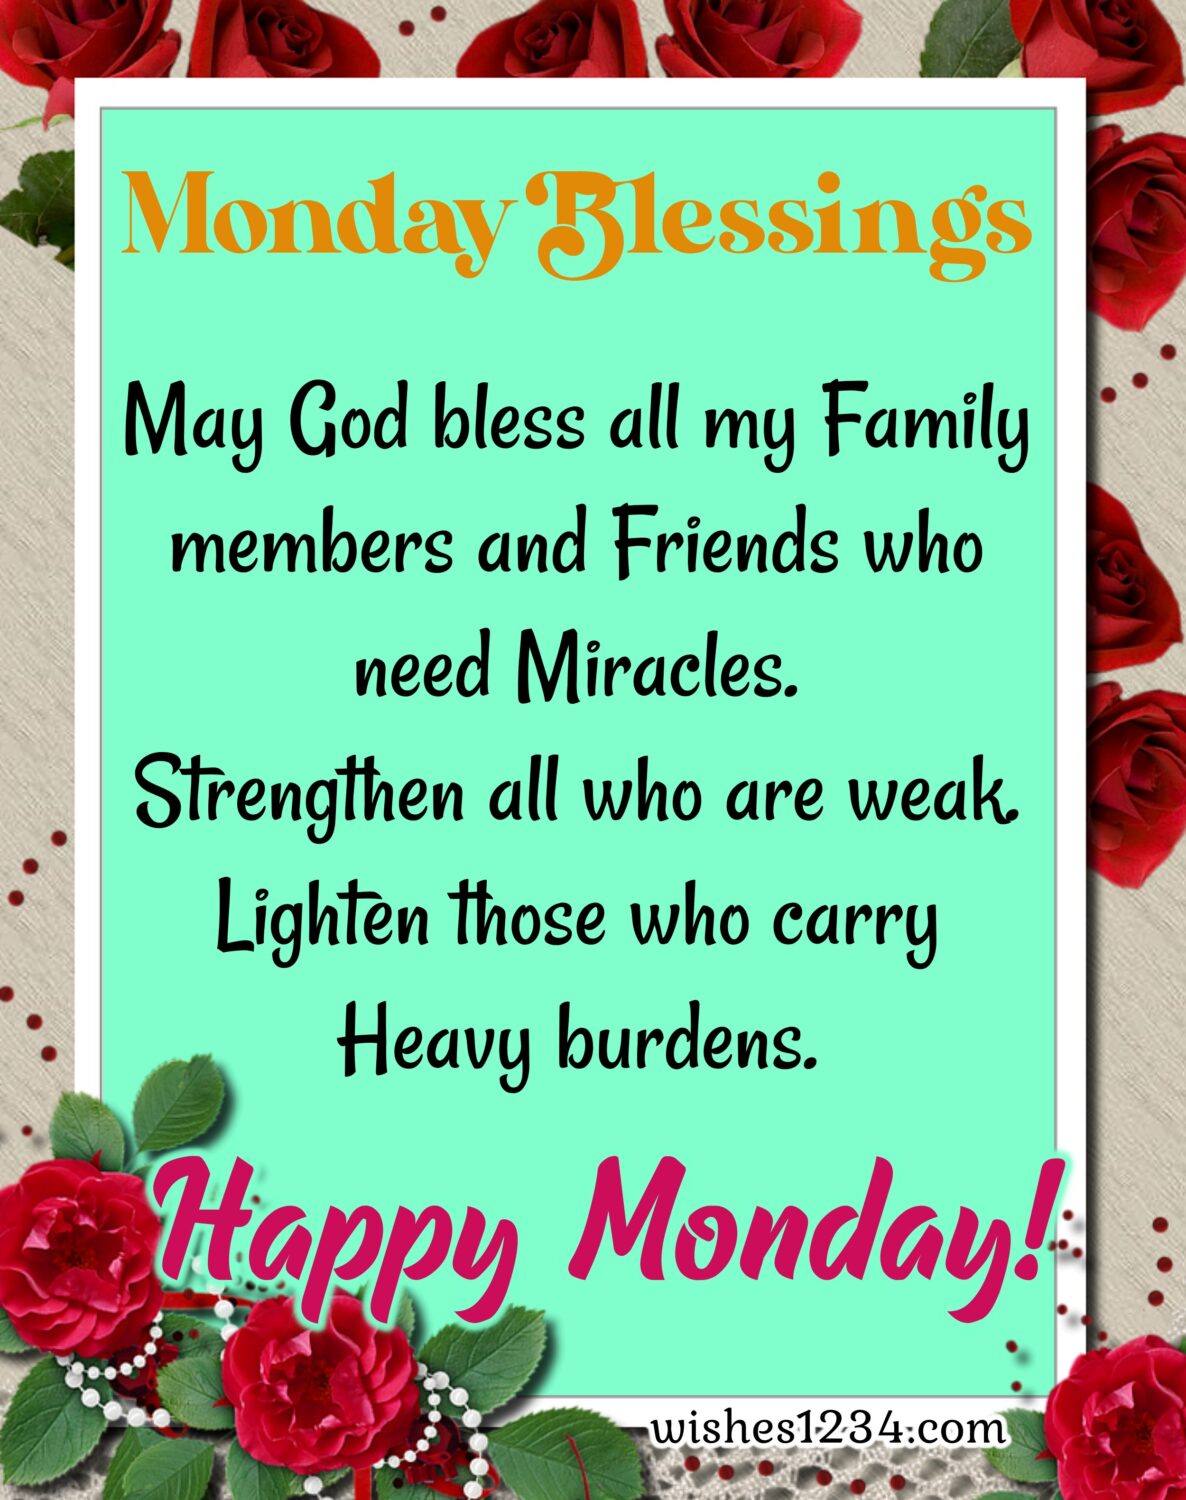 Monday blessings with red roses background, Quotes about Monday.